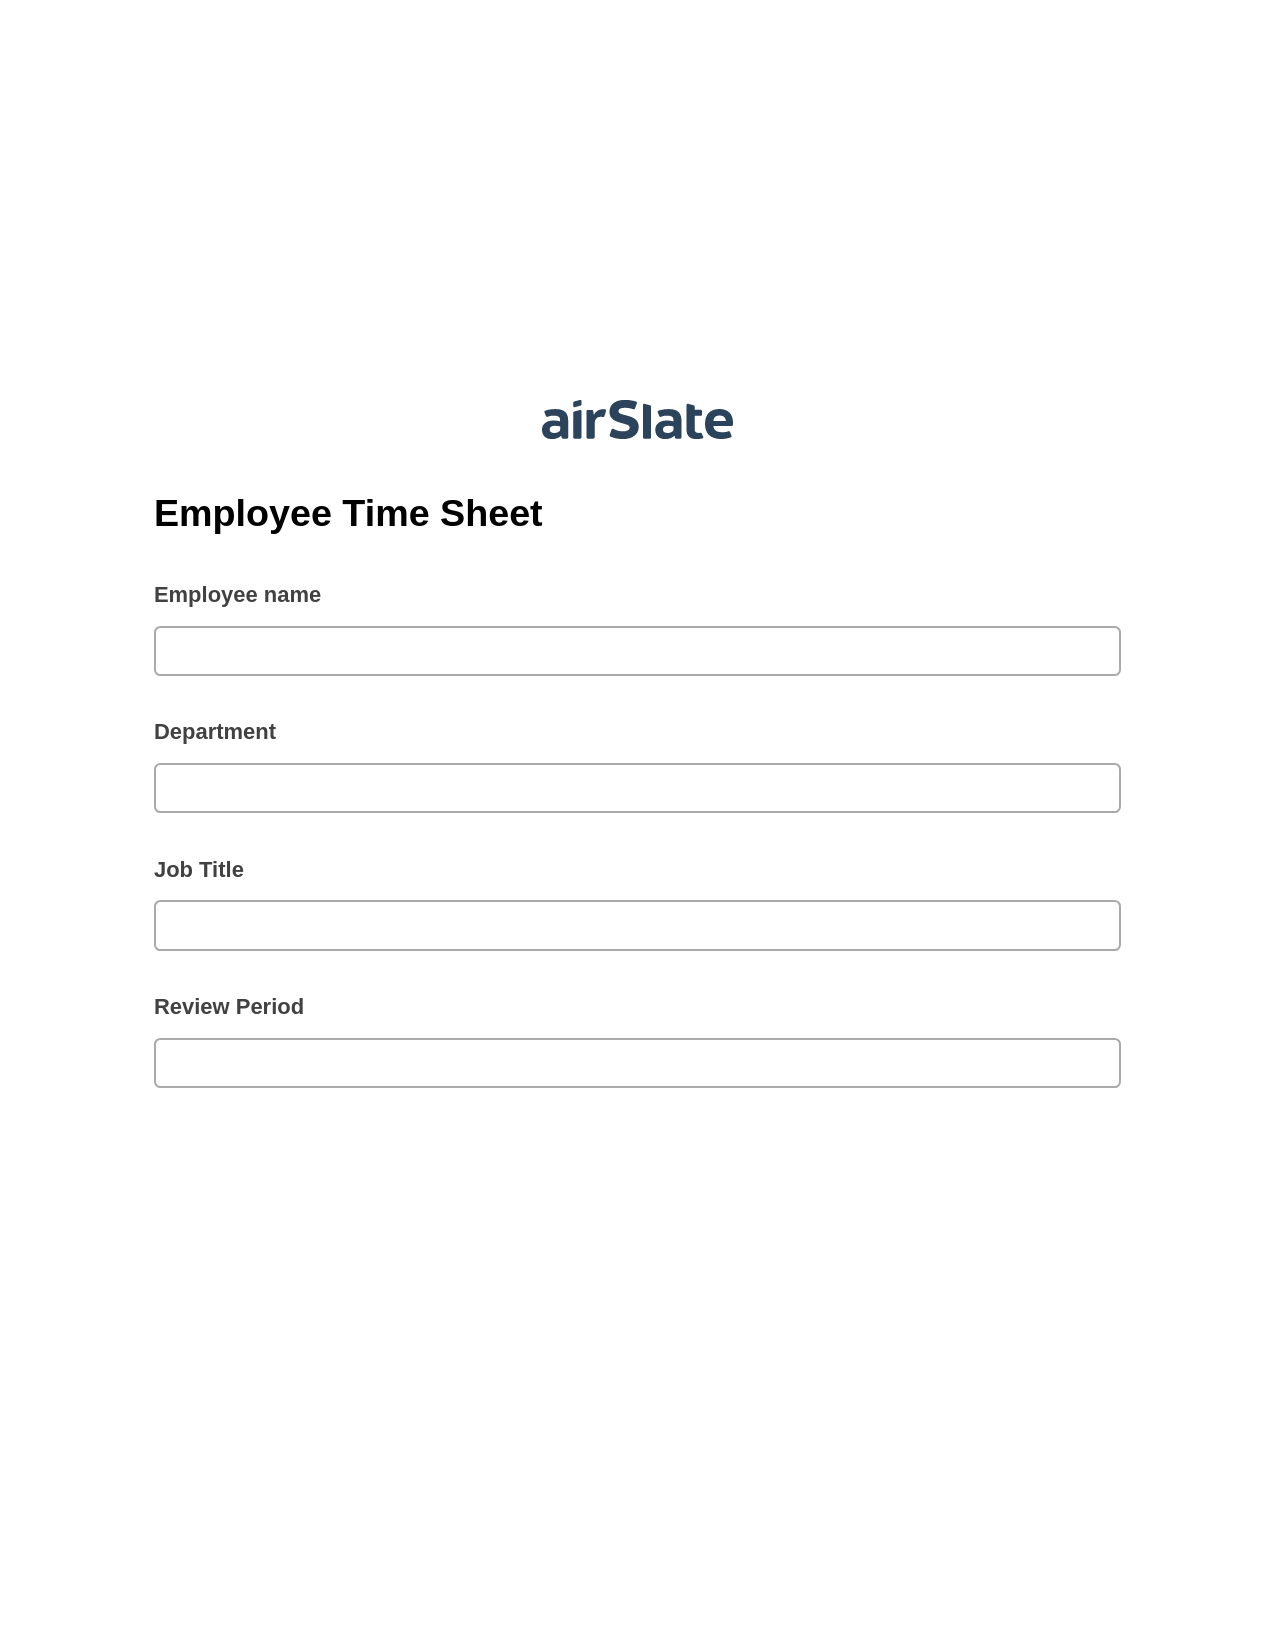 Multirole Employee Time Sheet Pre-fill from another Slate Bot, Create slate addon, Archive to Box Bot